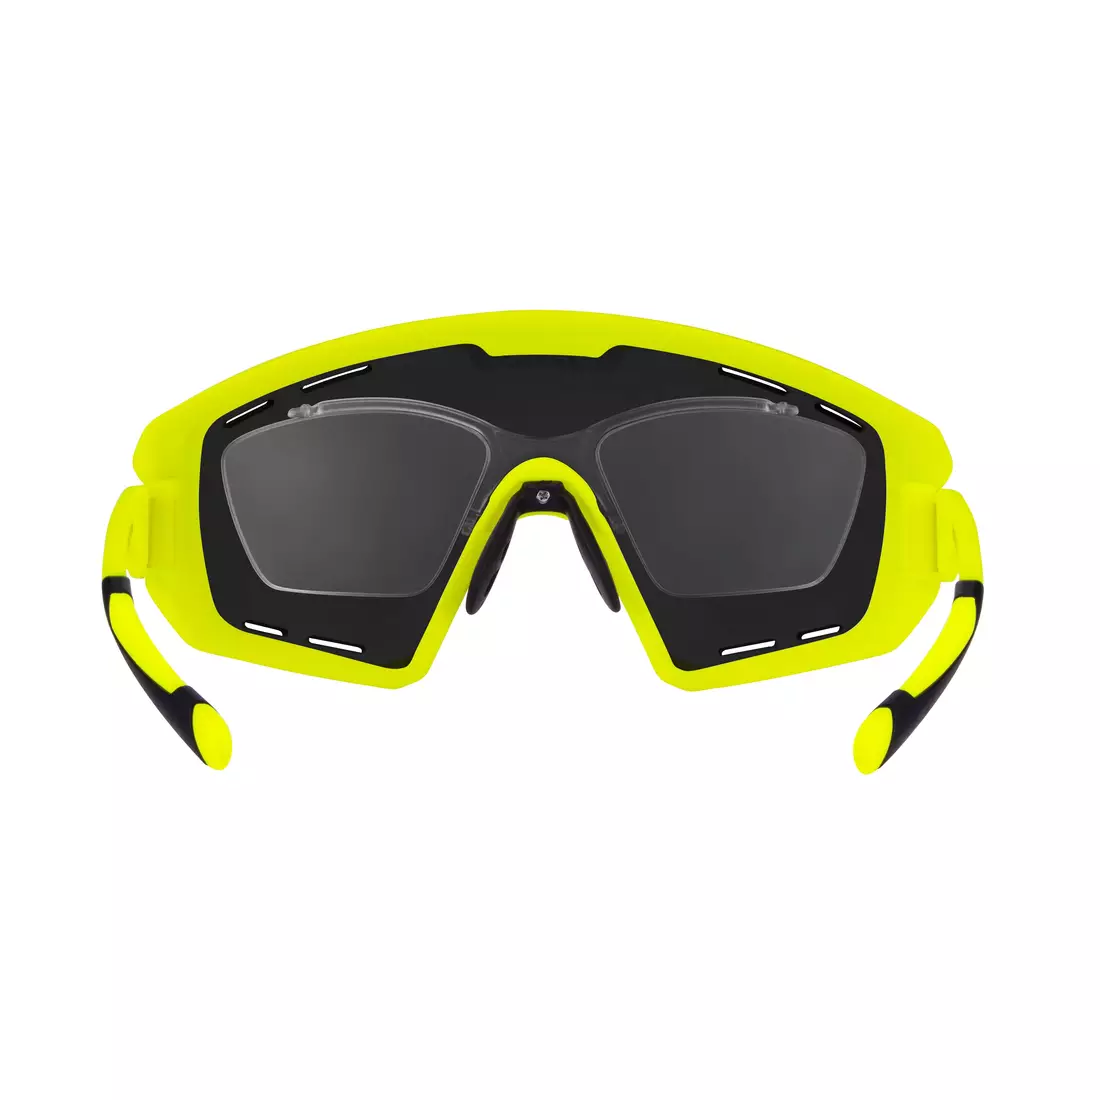 FORCE cycling / sports glasses OMBRO PLUS fluo mat 91120